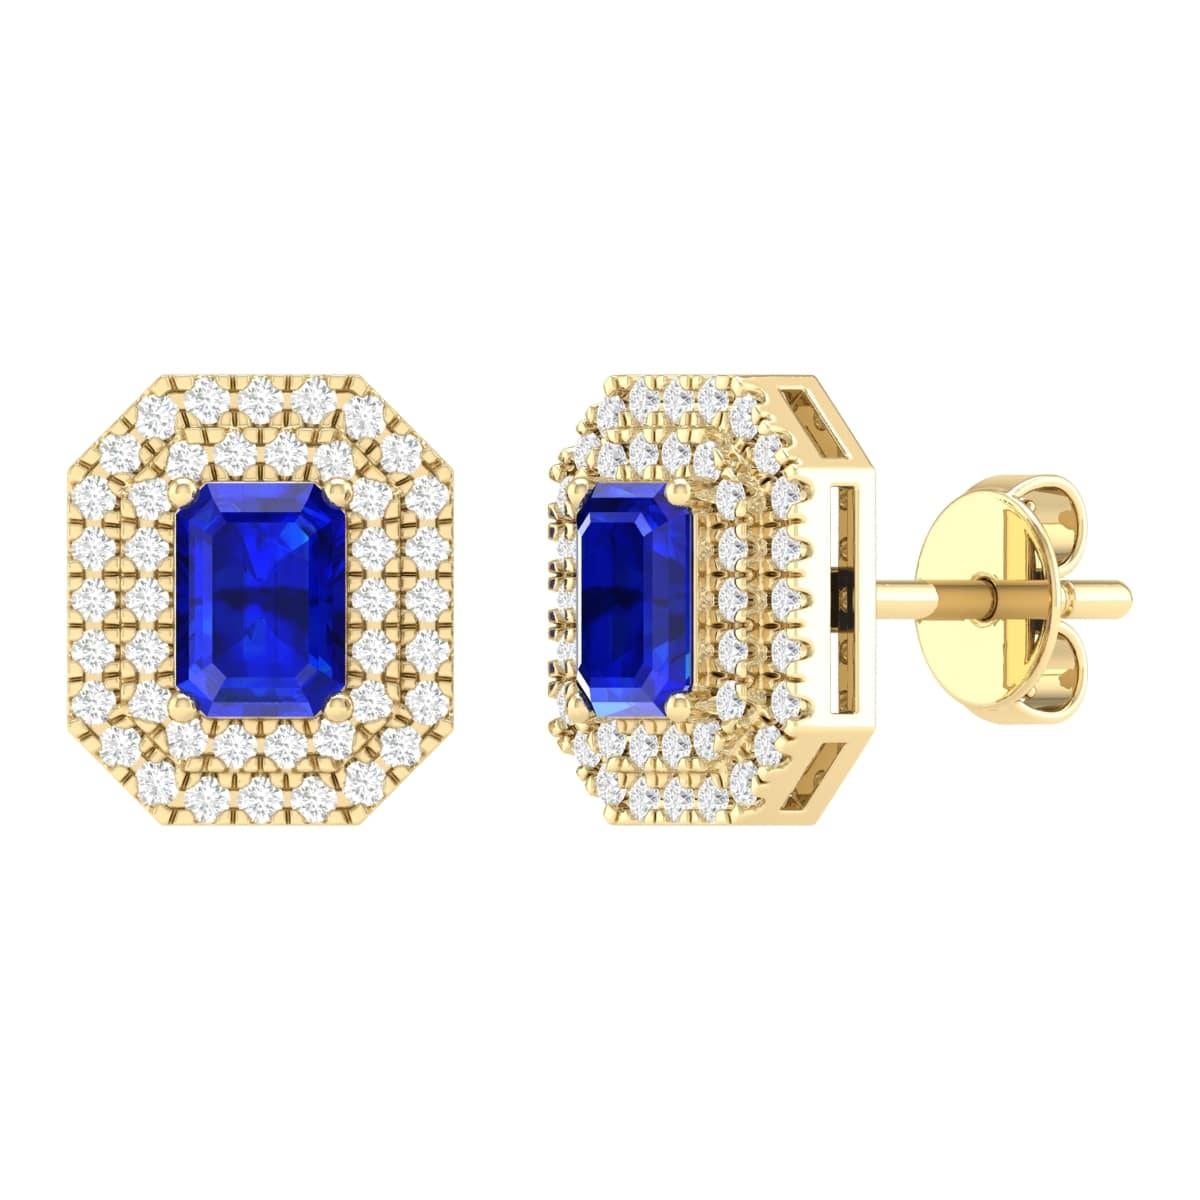 18 Karat Yellow Gold 1.26 Carat Sapphire Solitaire Stud Earrings For Sale